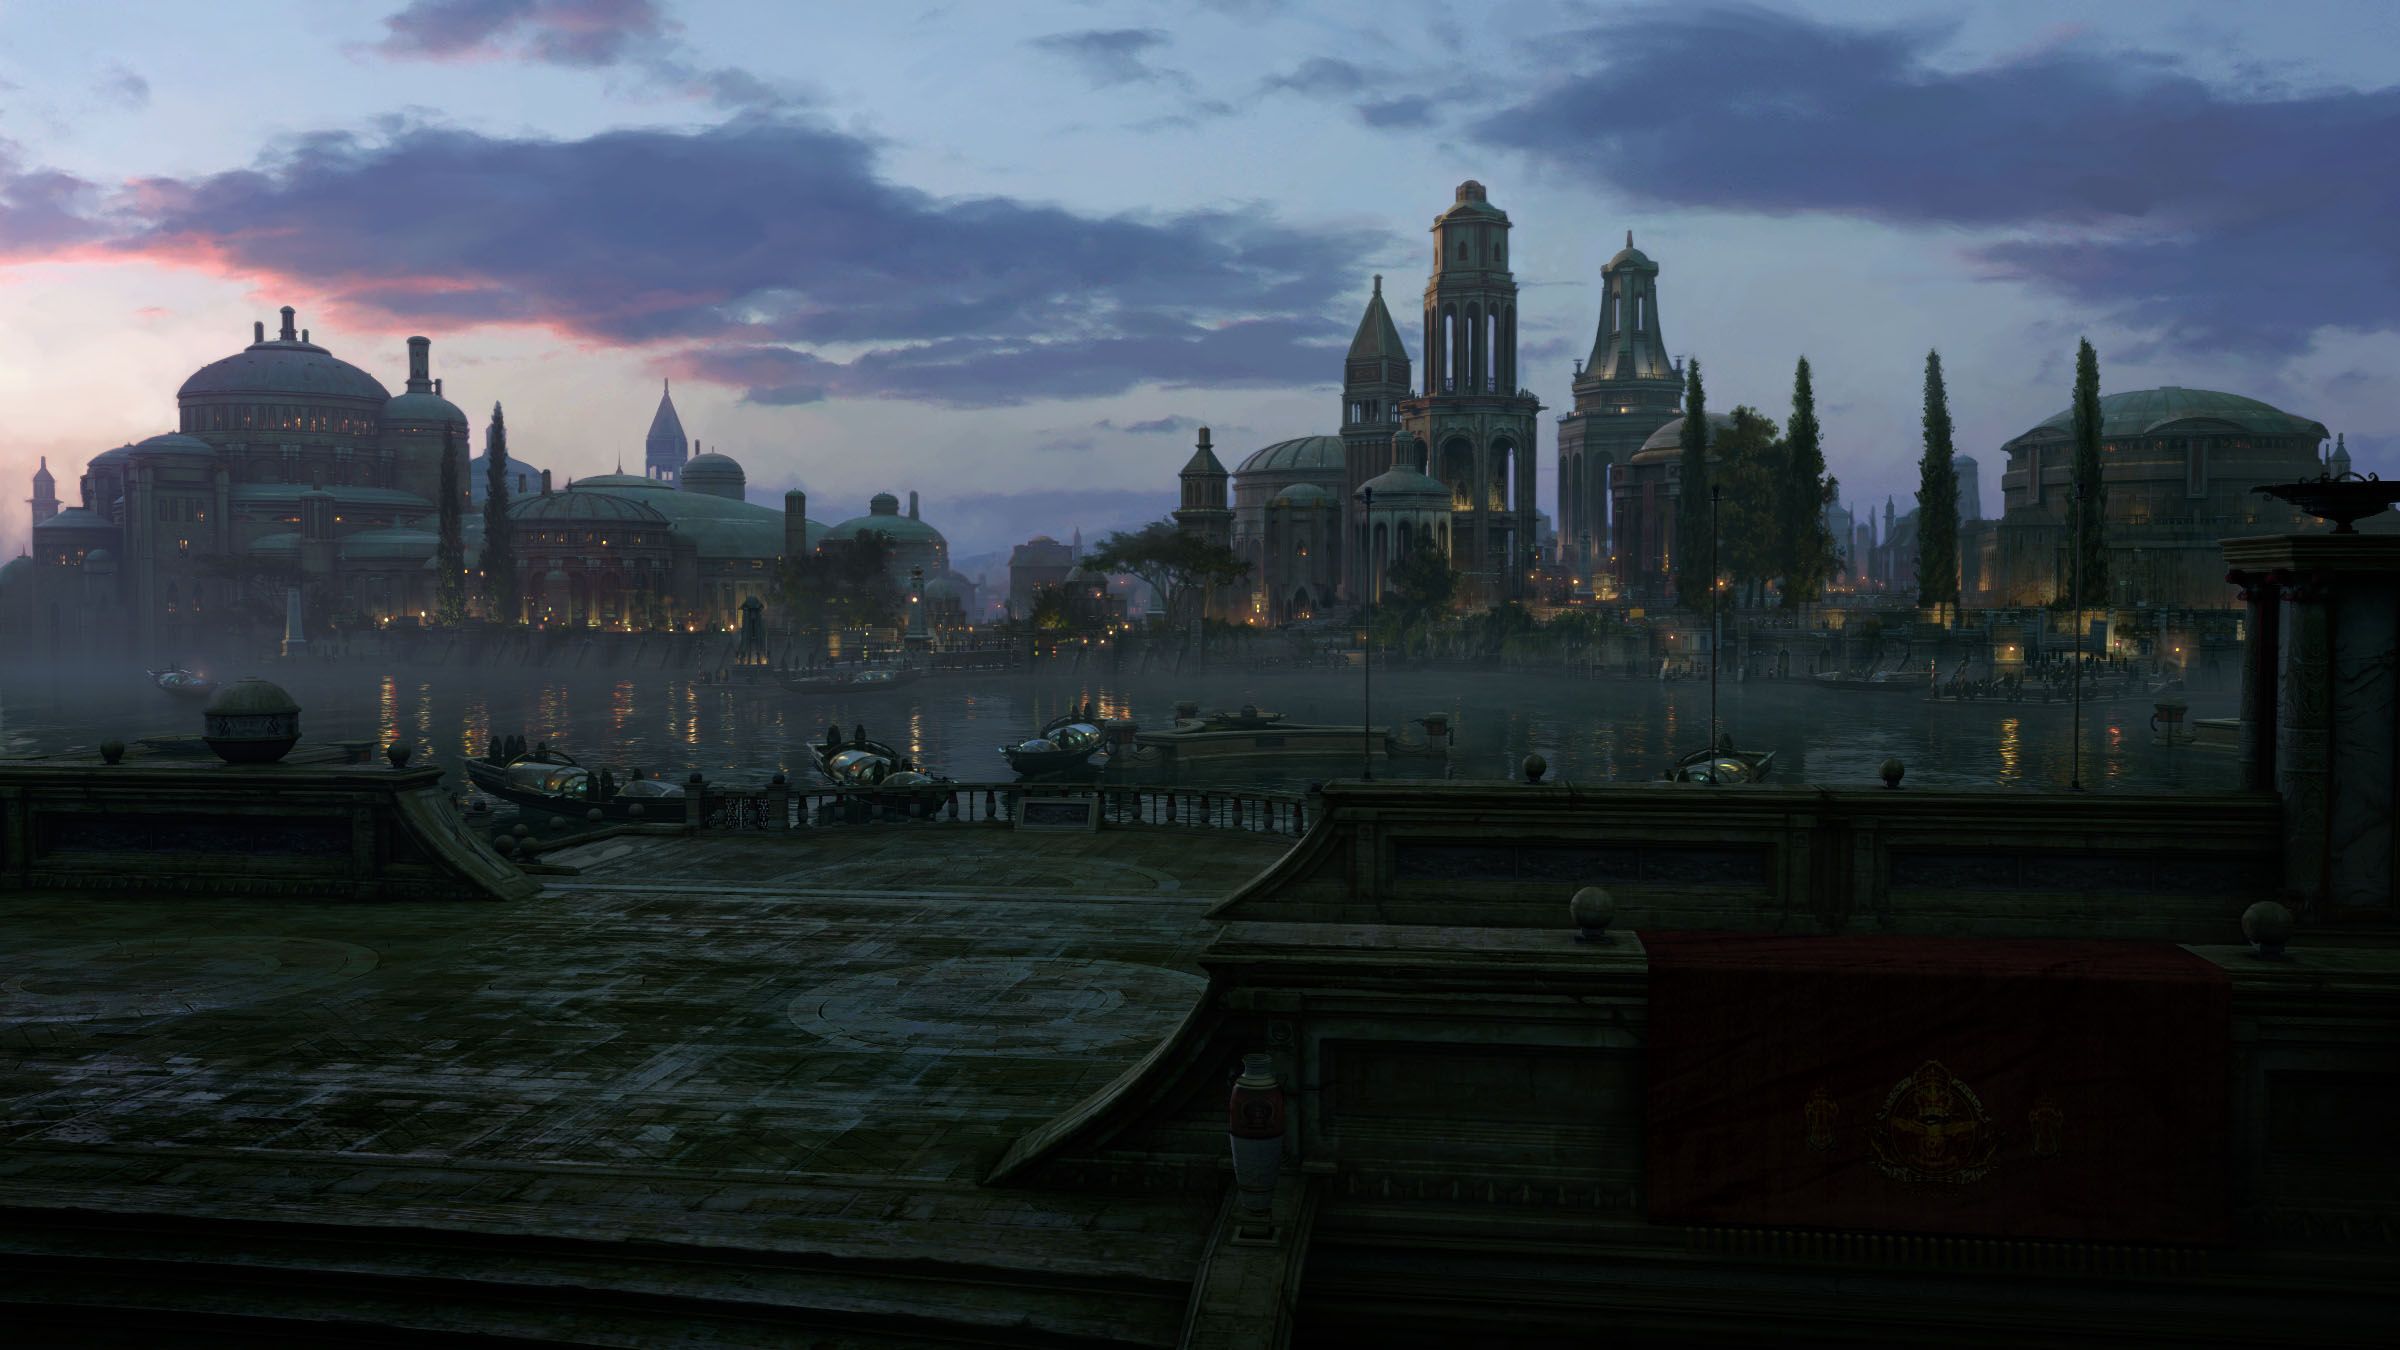 Naboo Wallpaper. Naboo Wallpaper, Attack of the Clones Naboo Wallpaper and Naboo Villa Wallpaper